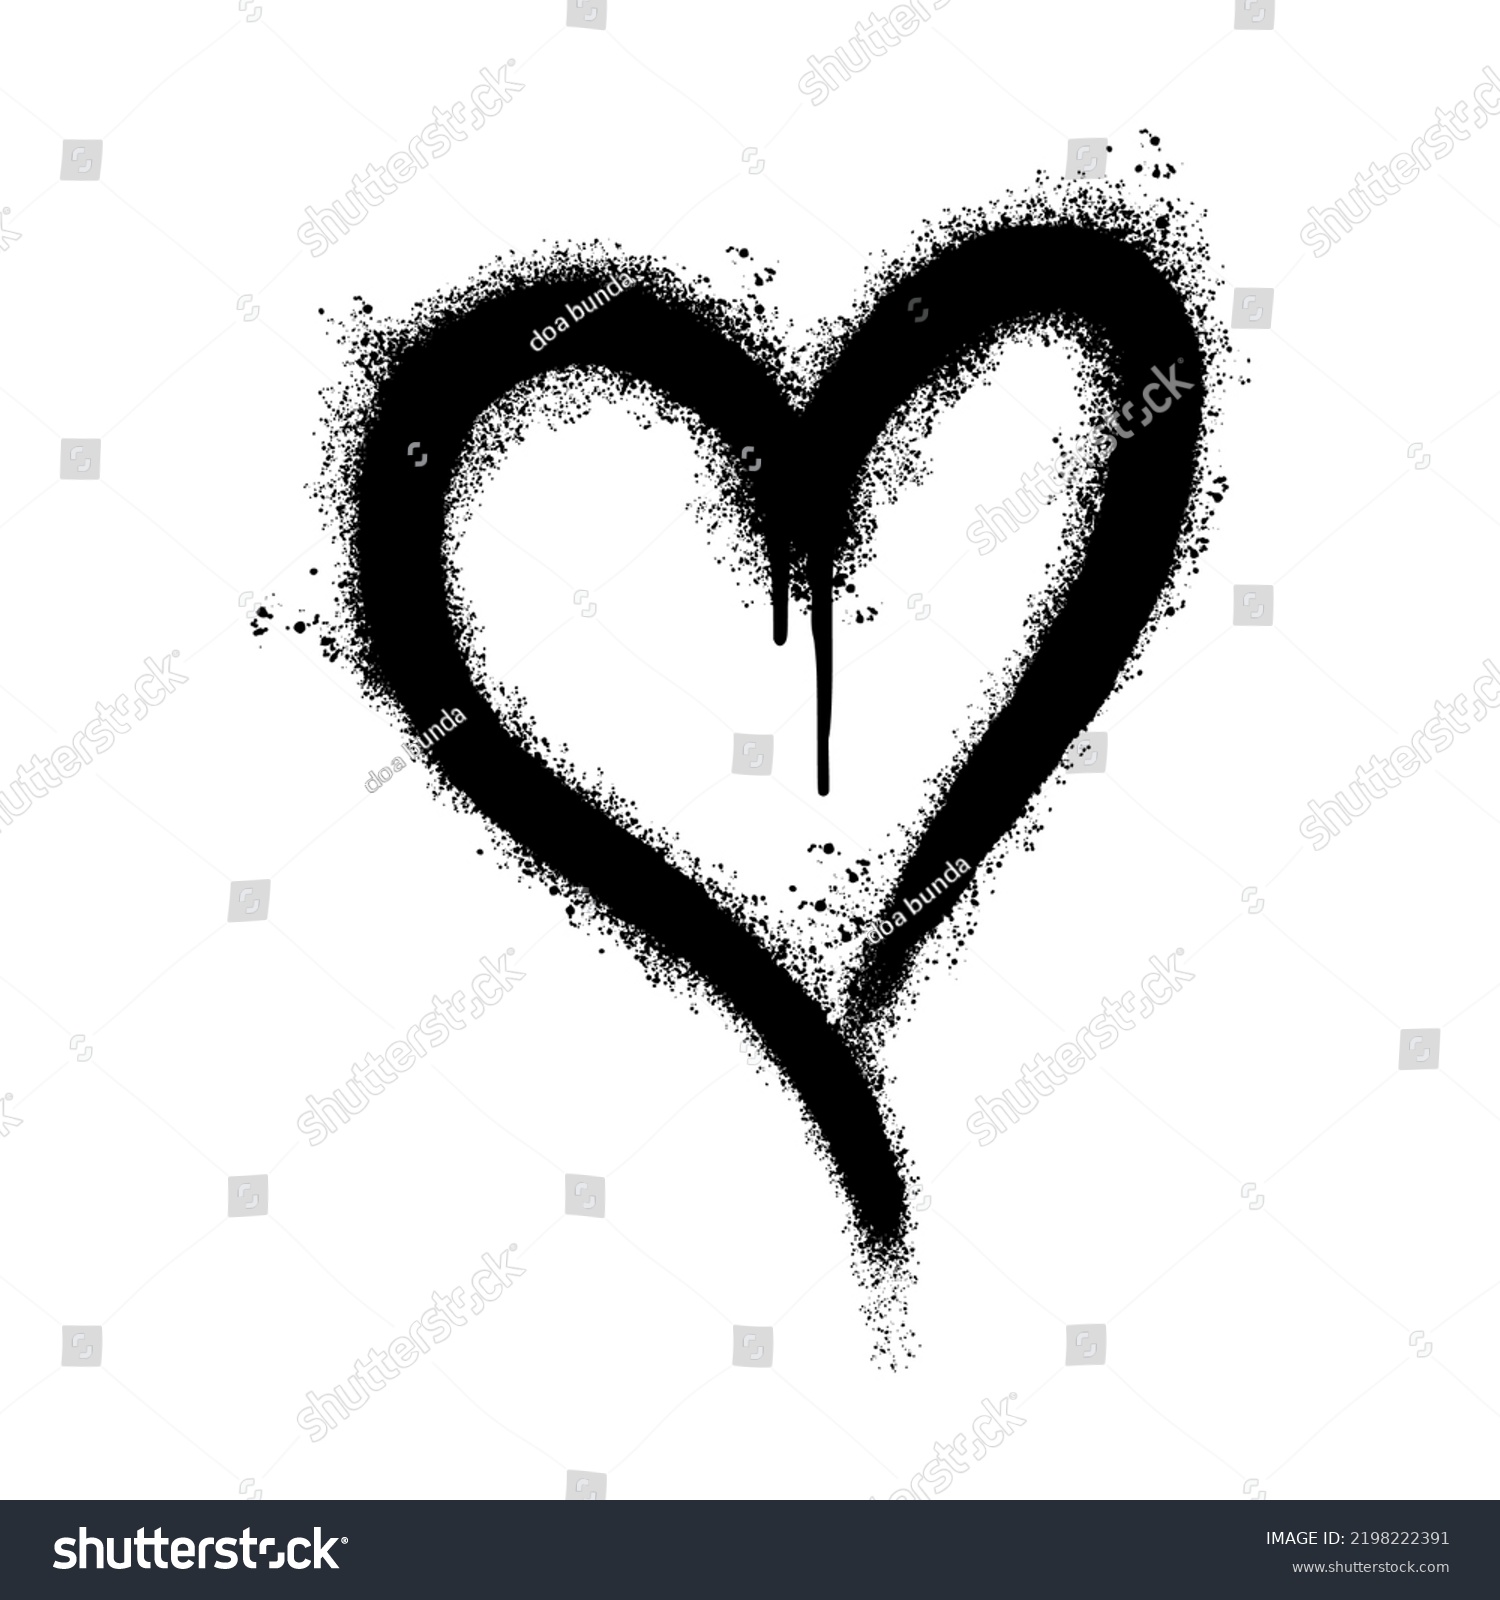 SVG of Spray Painted Graffiti heart icon Word Sprayed isolated with a white background. graffiti font love icon with over spray in black over white. Vector illustration. svg